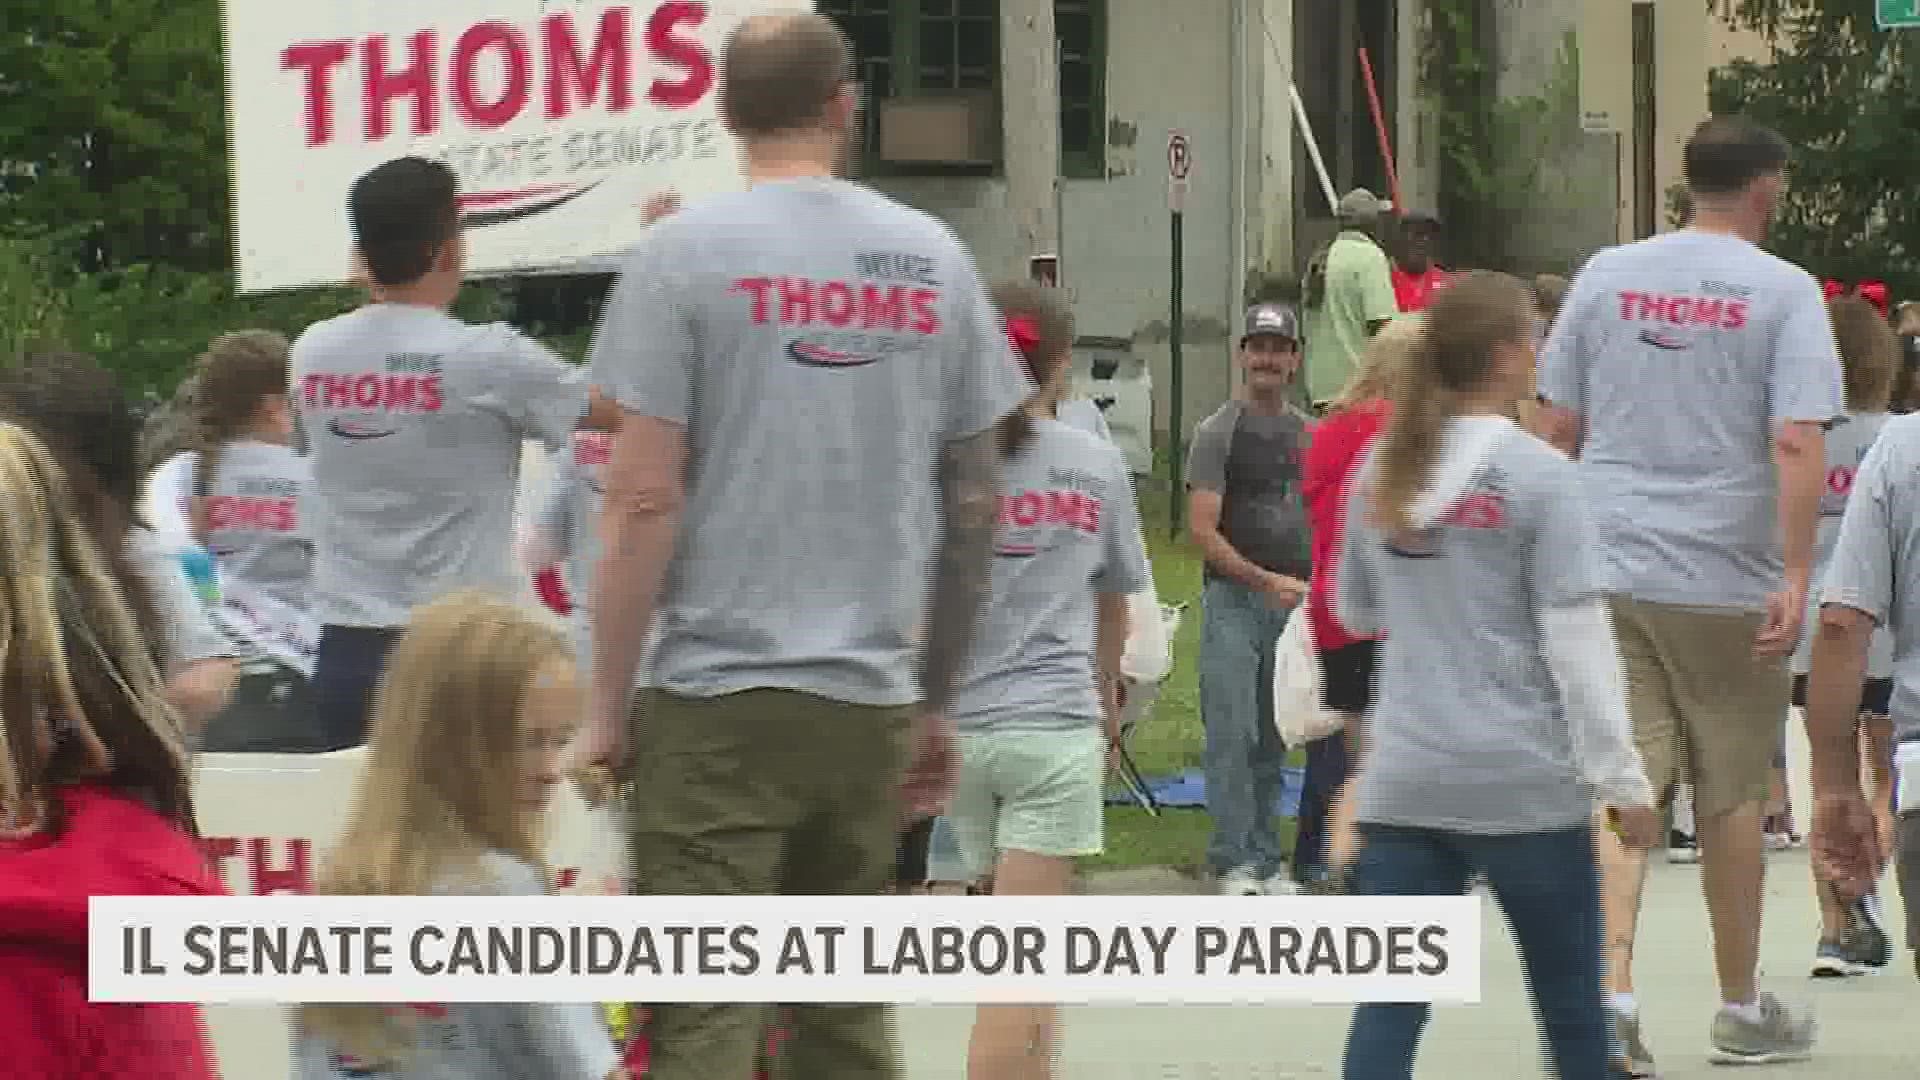 Democrat Mike Halpin and Republican Mike Thoms were both out at the parades, looking to gain more support as midterm elections near.